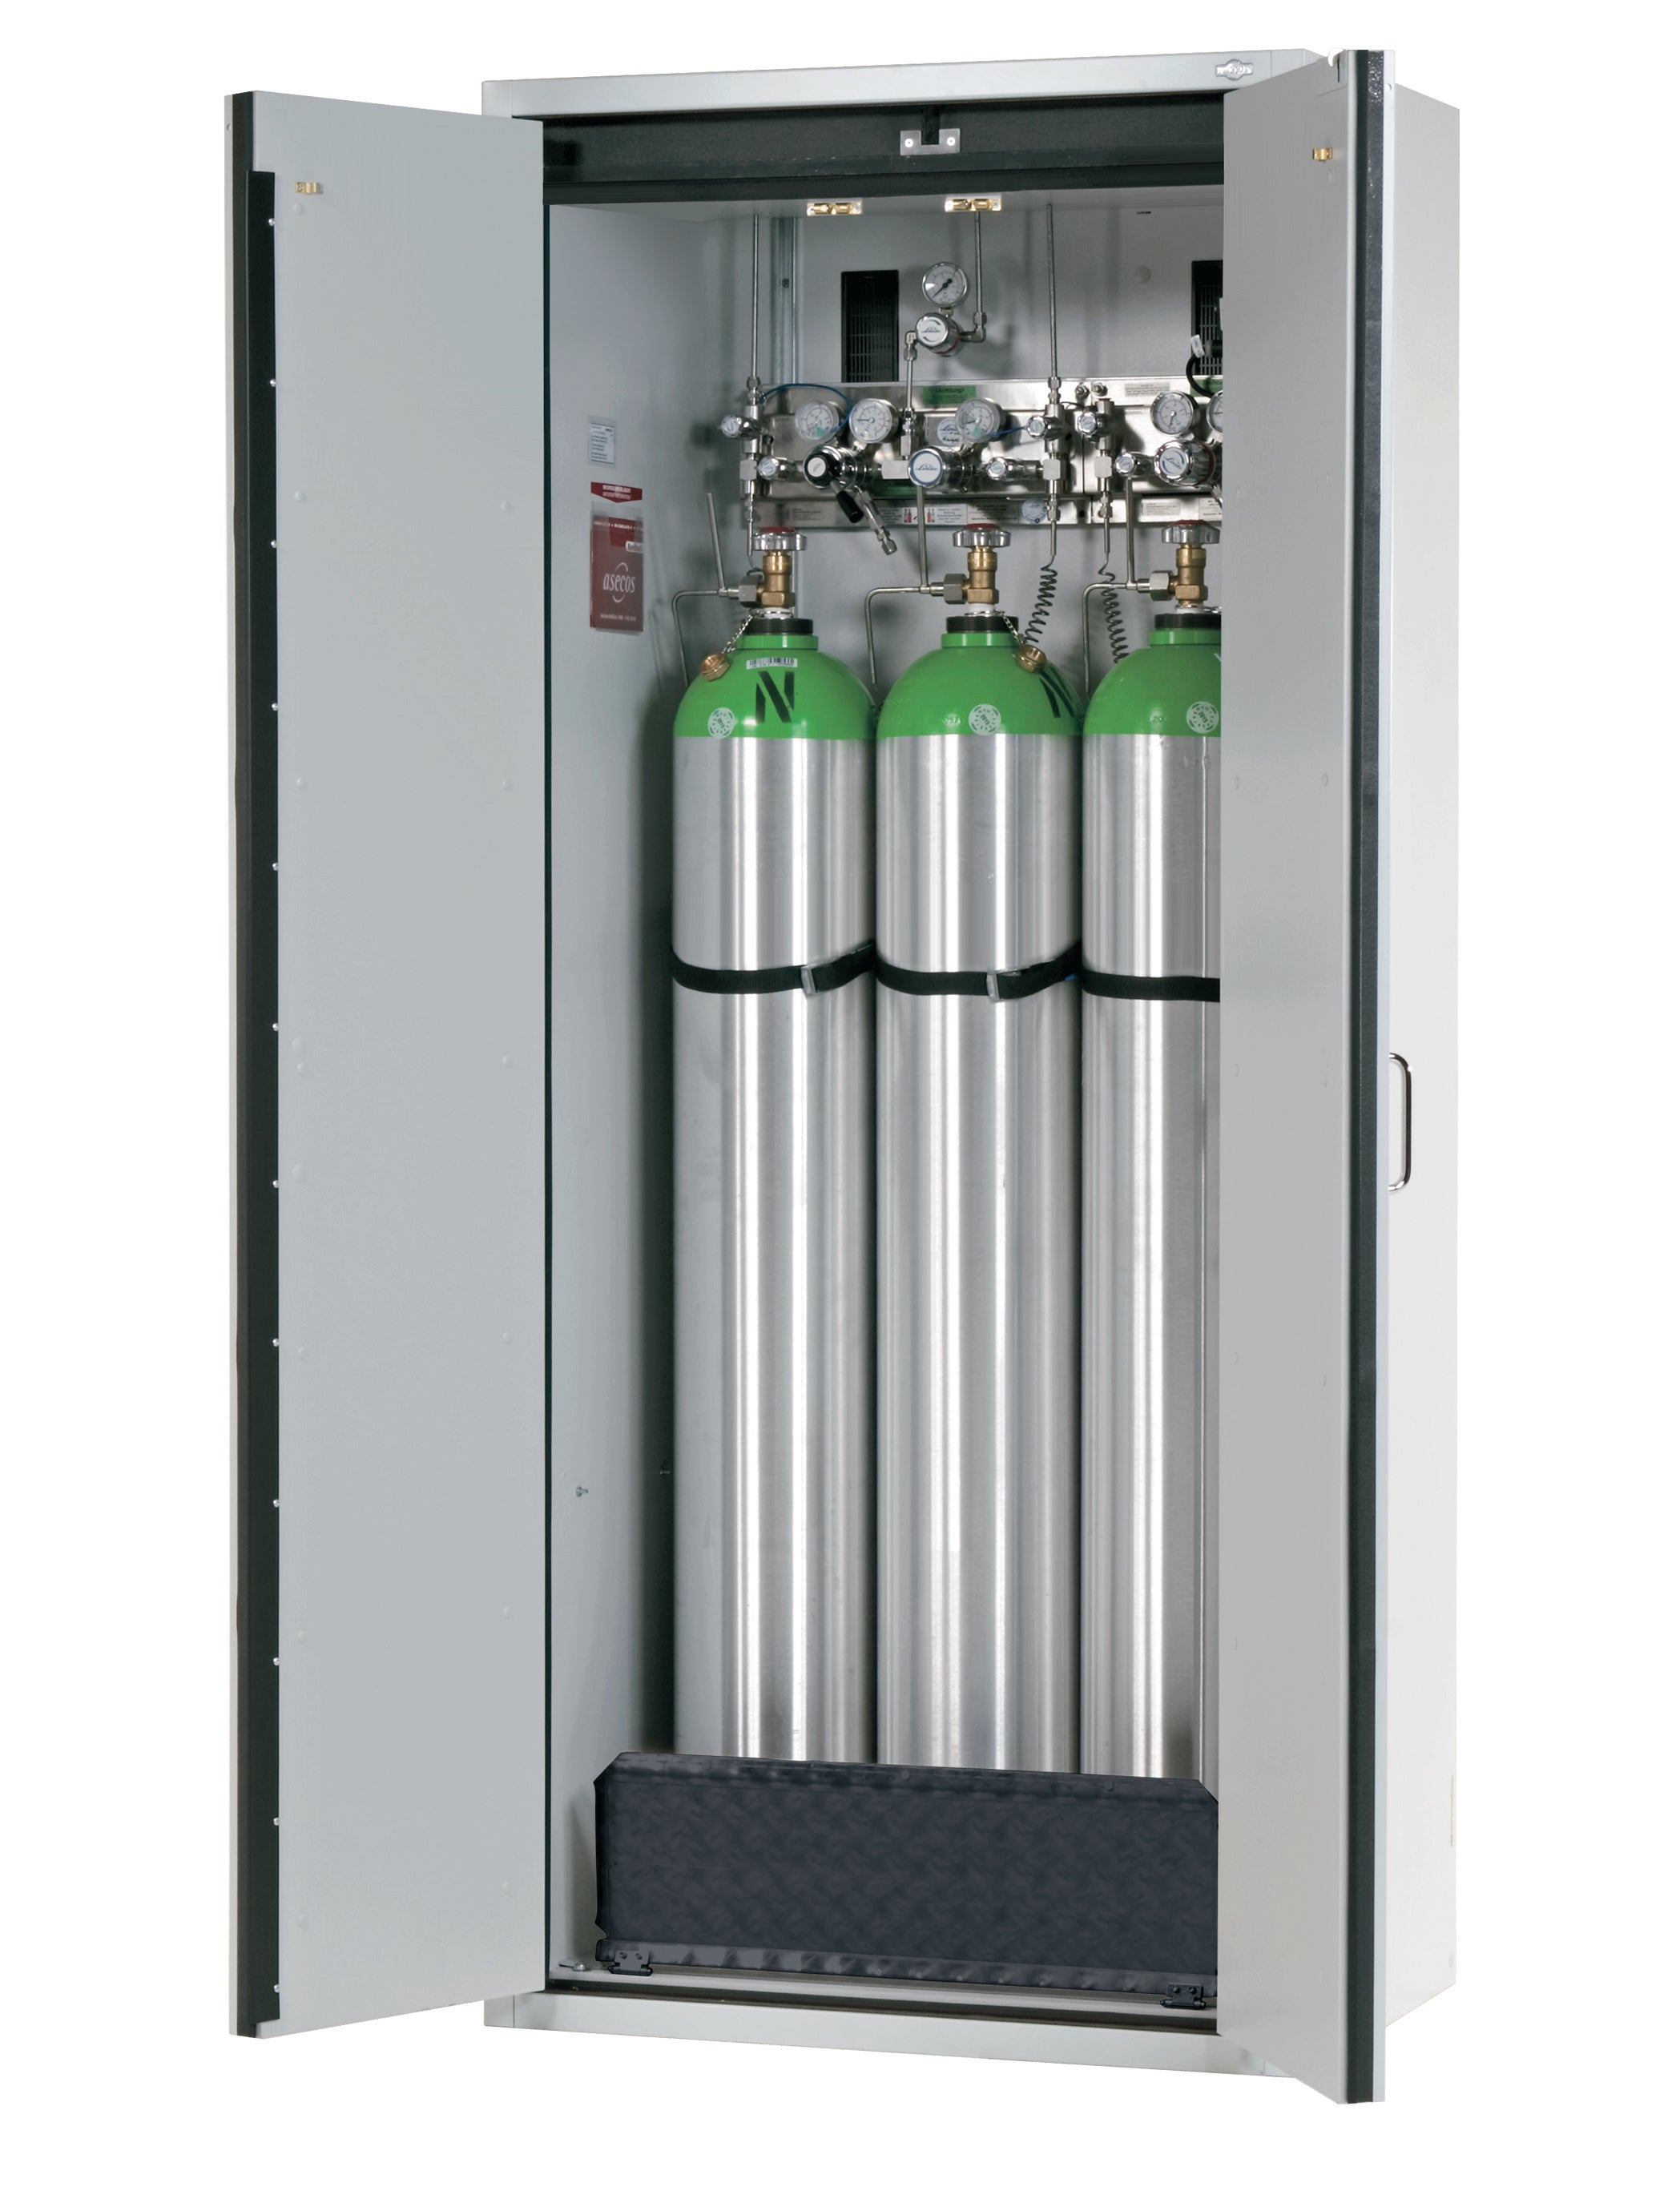 Type 30 compressed gas bottle cabinet G-CLASSIC-30 model G30.205.090 in light gray RAL 7035 with standard interior fittings for 3x compressed gas bottles of 50 liters each